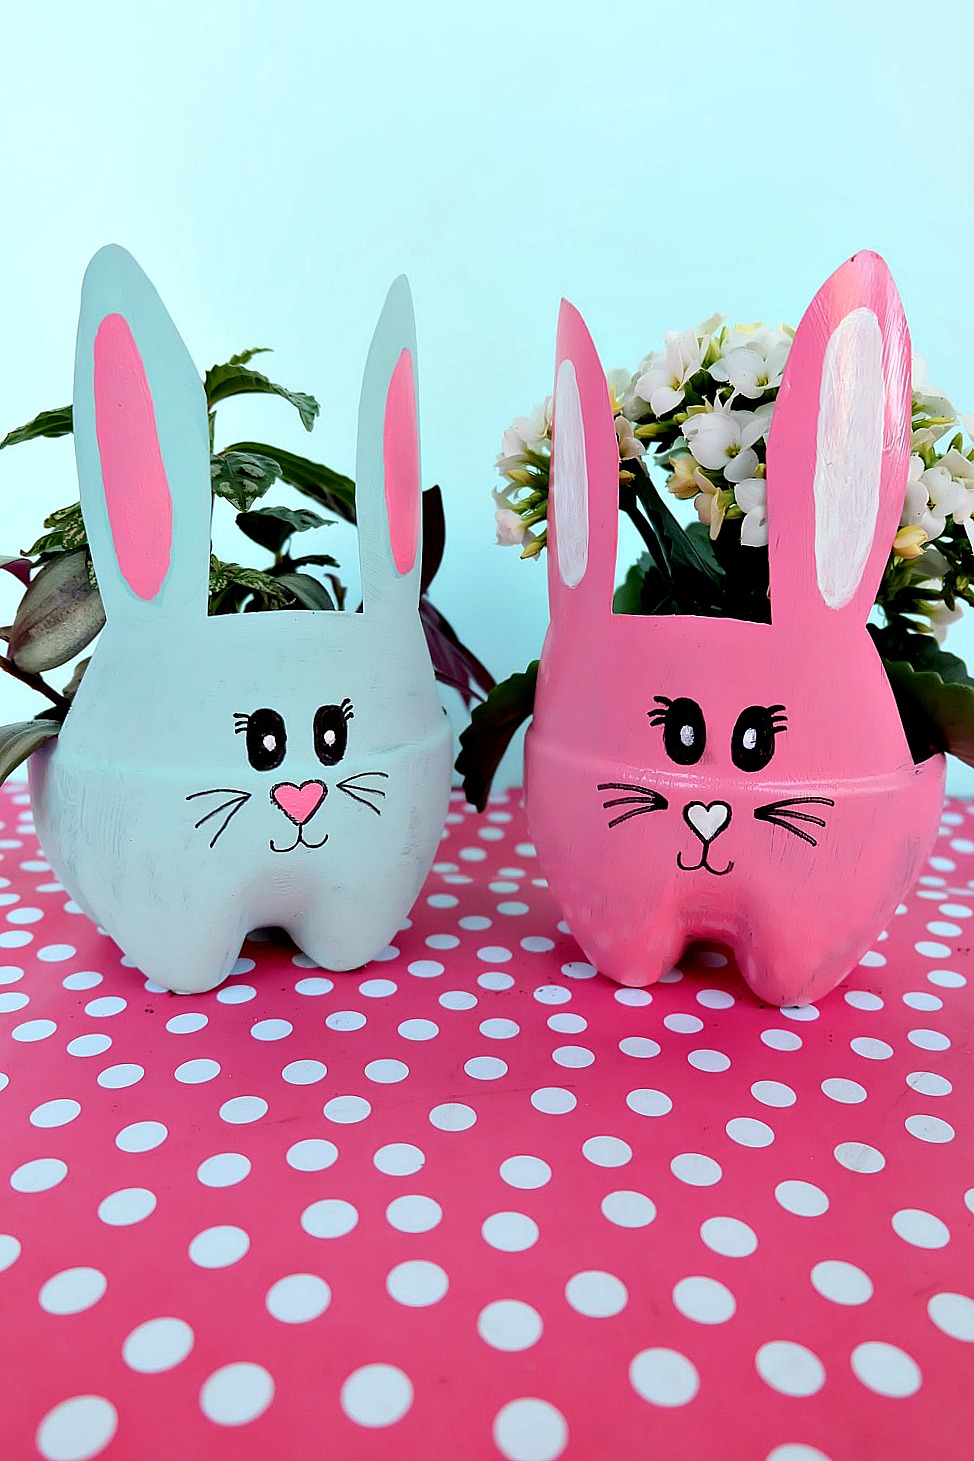 These DIY Easter Bunny Planters are made using recycled pop bottles! Bright and colorful they are a fun craft for a table centerpiece, front porch or handmade Easter gift idea! An easy upcycled kids Easter Craft to keep little ones occupied during spring break and to teach gardening skills. #Easter #Crafts #Upcycled HandmadeGift #Gardening